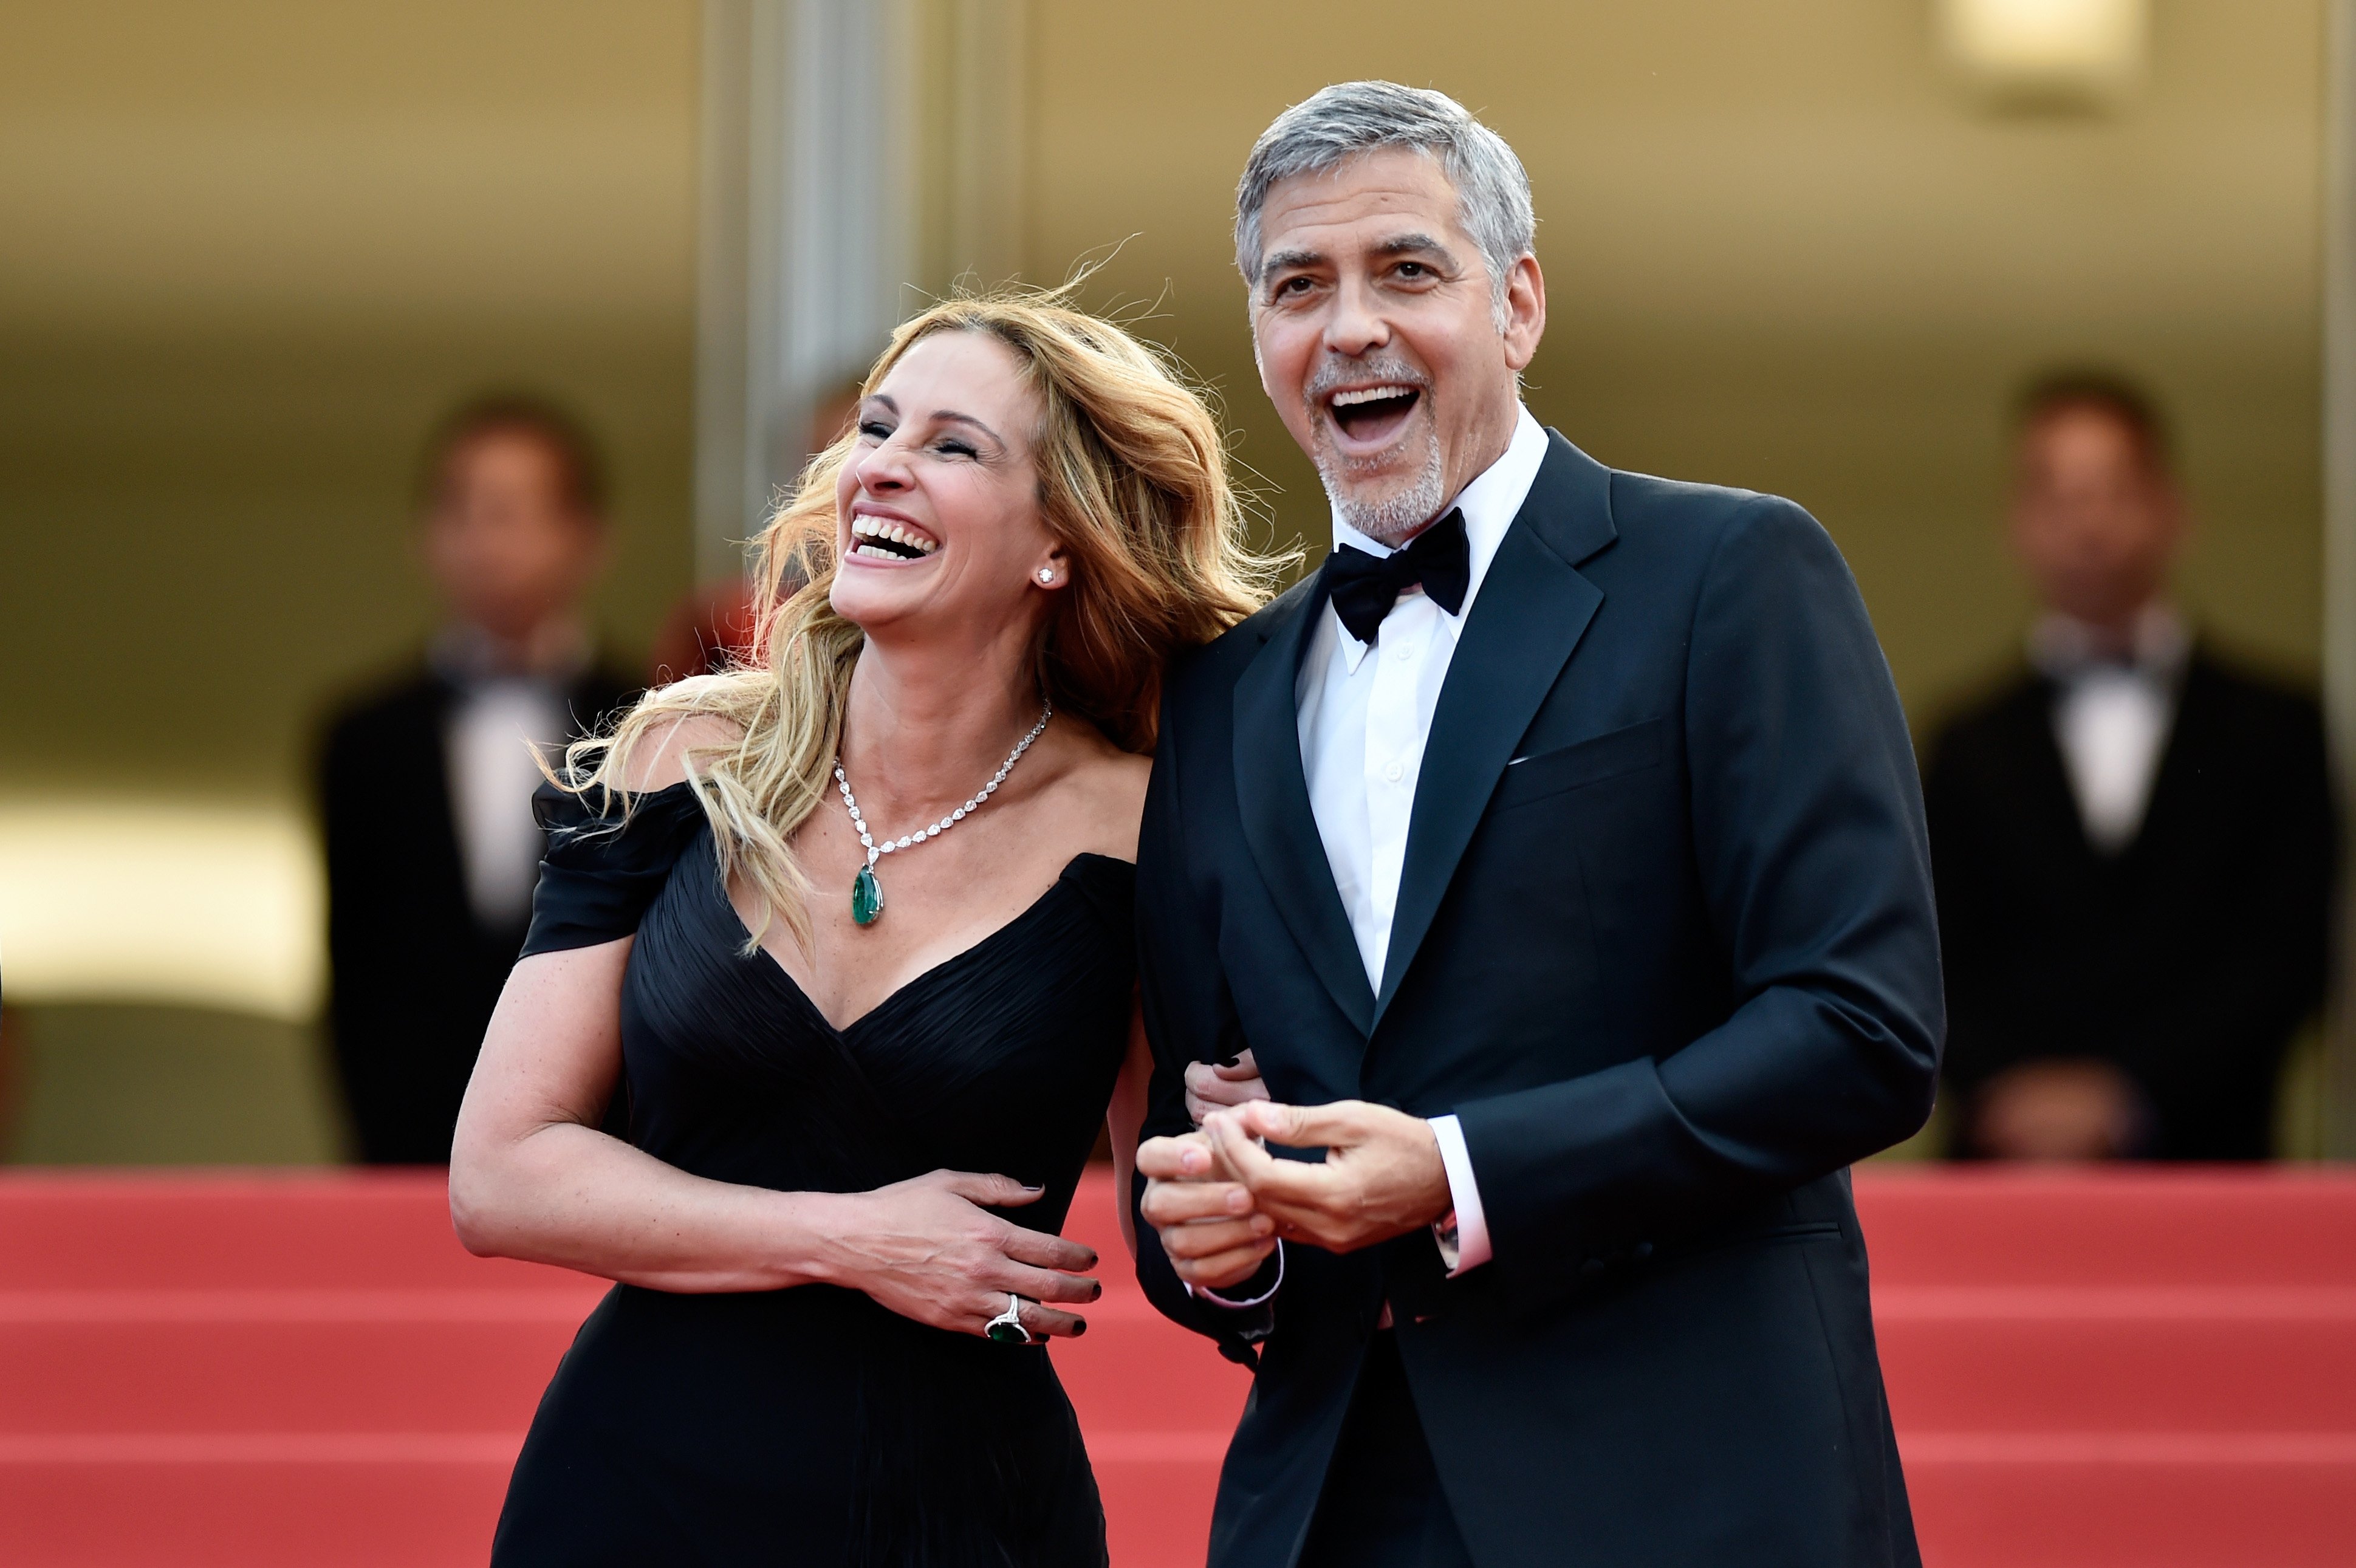 Julia Roberts and George Clooney attend the "Money Monster" premiere during the 69th annual Cannes Film Festival at the Palais des Festivals on May 12, 2016 in Cannes, France | Source: Getty Images 